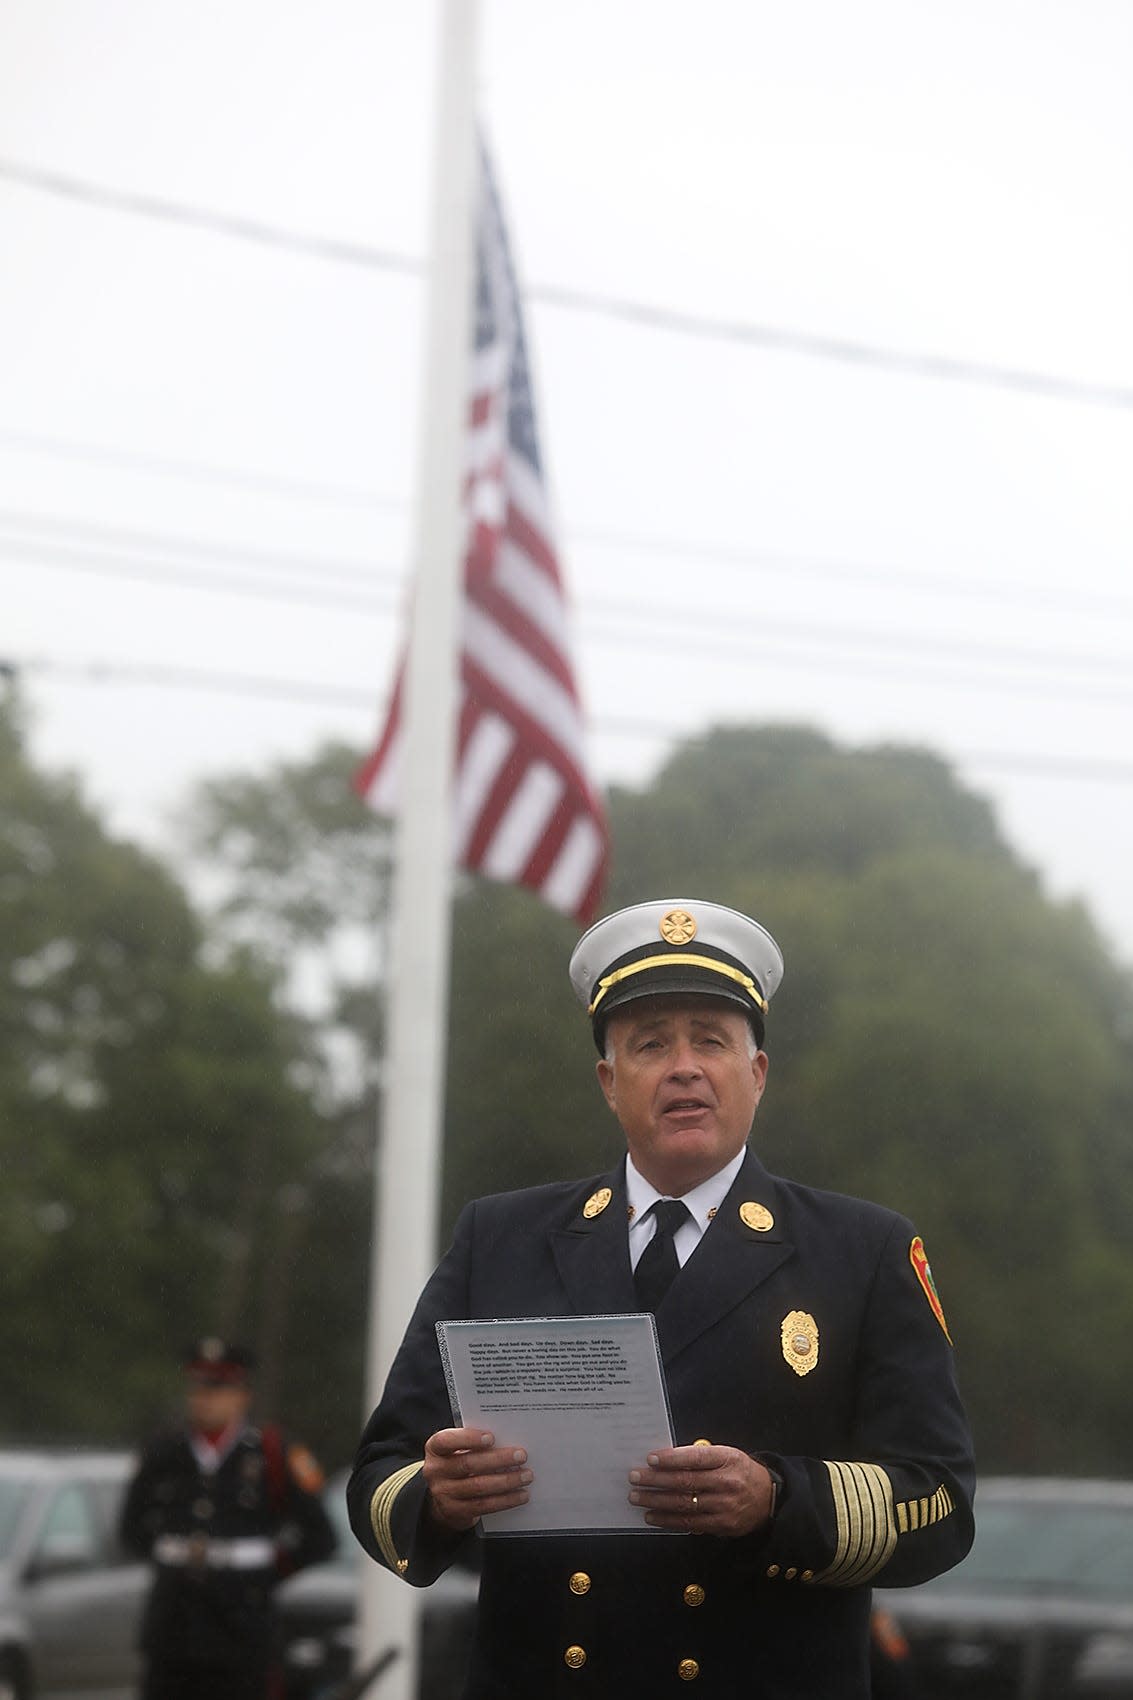 Marshfield Fire Chief William Hocking reads a poem written by the Rev. Mychal Judge, FDNY chaplain, who wrote the prayer on Sept. 10, the day before the attacks that would claim his life, during the remembrance ceremony at the fire station on Friday, Sept. 11, 2020.